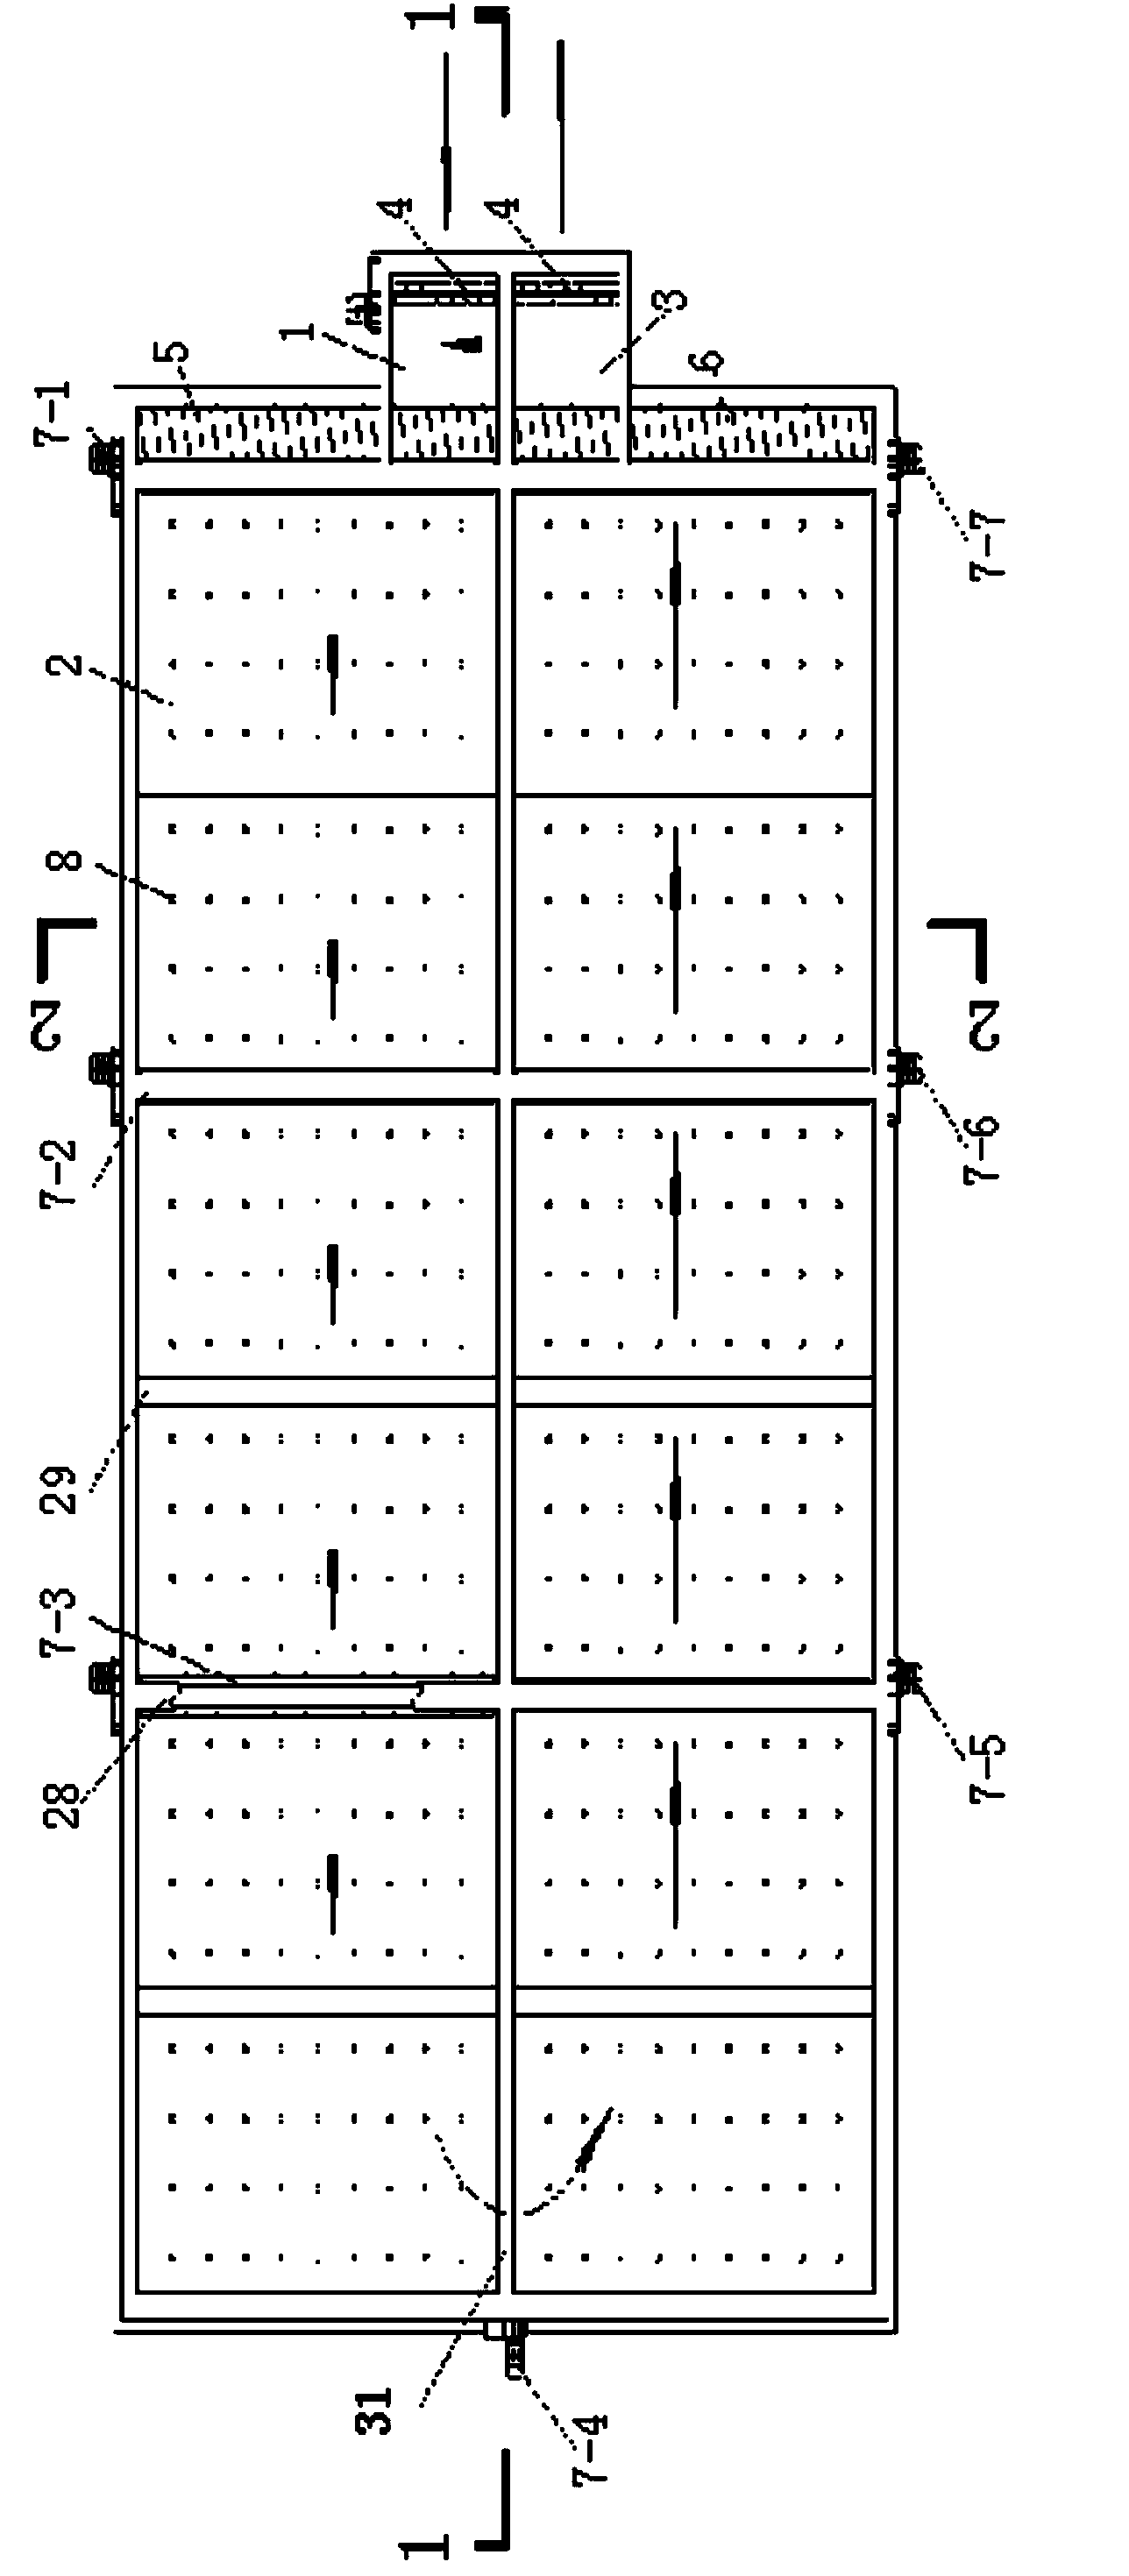 Large, horizontal, continuous and dry-type biogas fermentation device and method